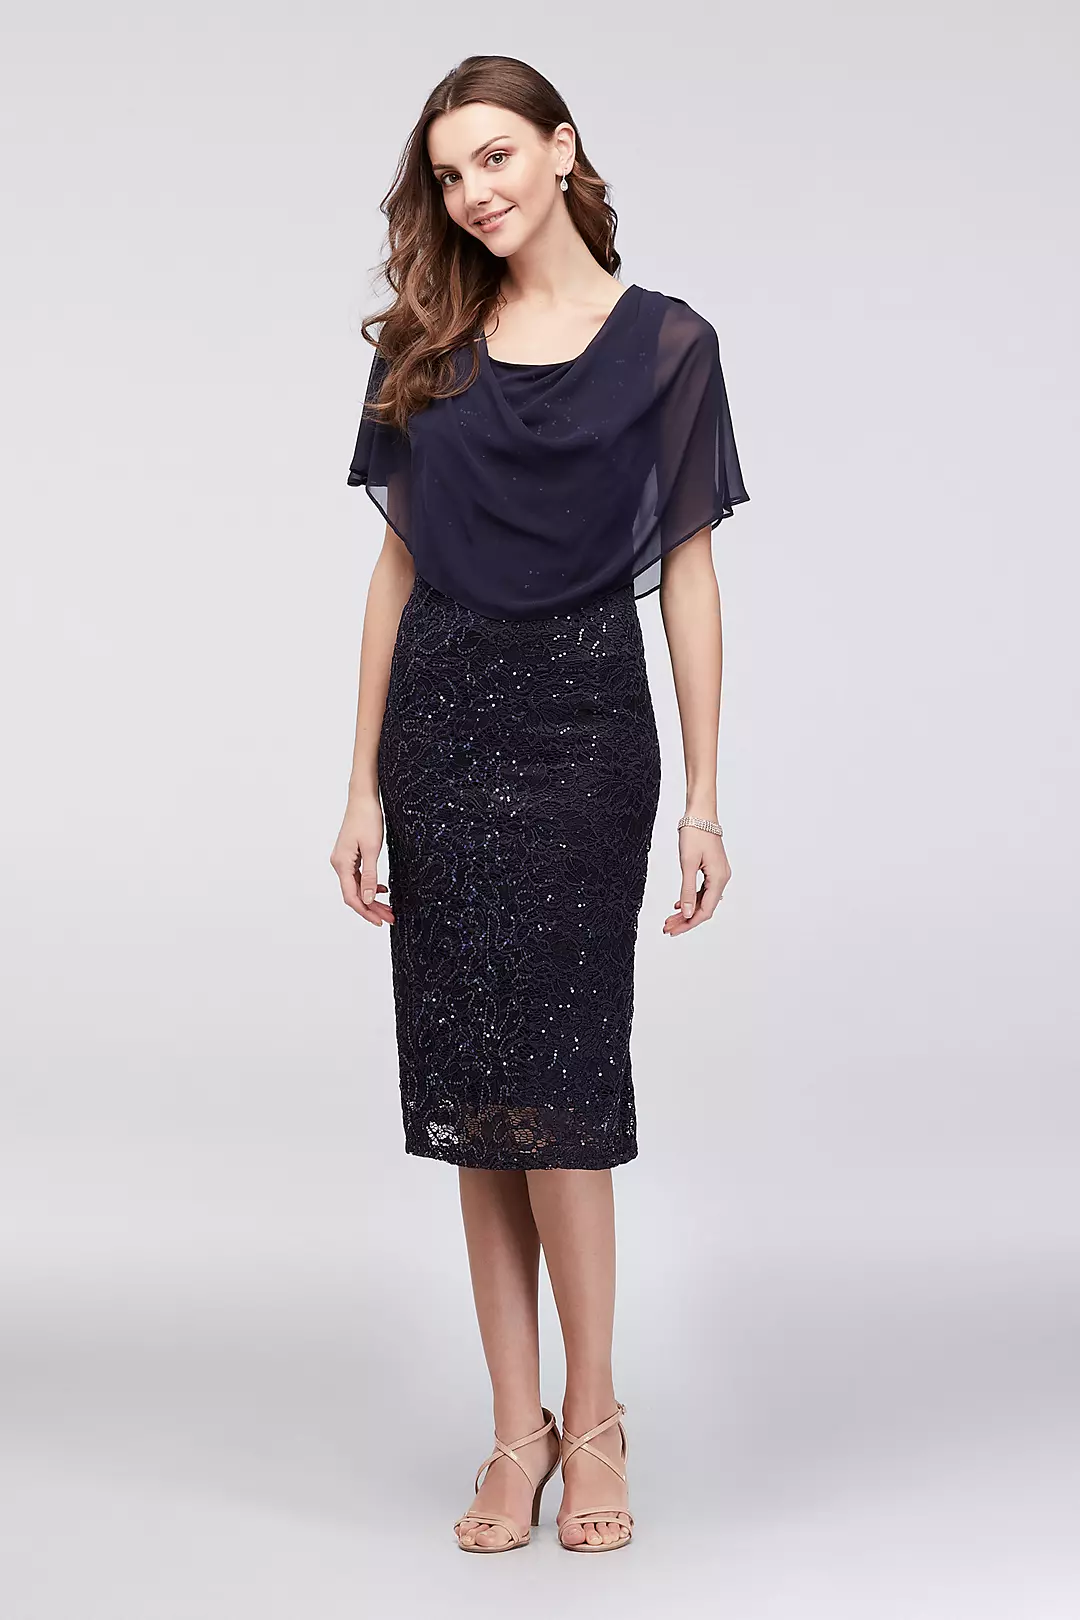 Sequin Lace Short Dress with Chiffon Capelet Image